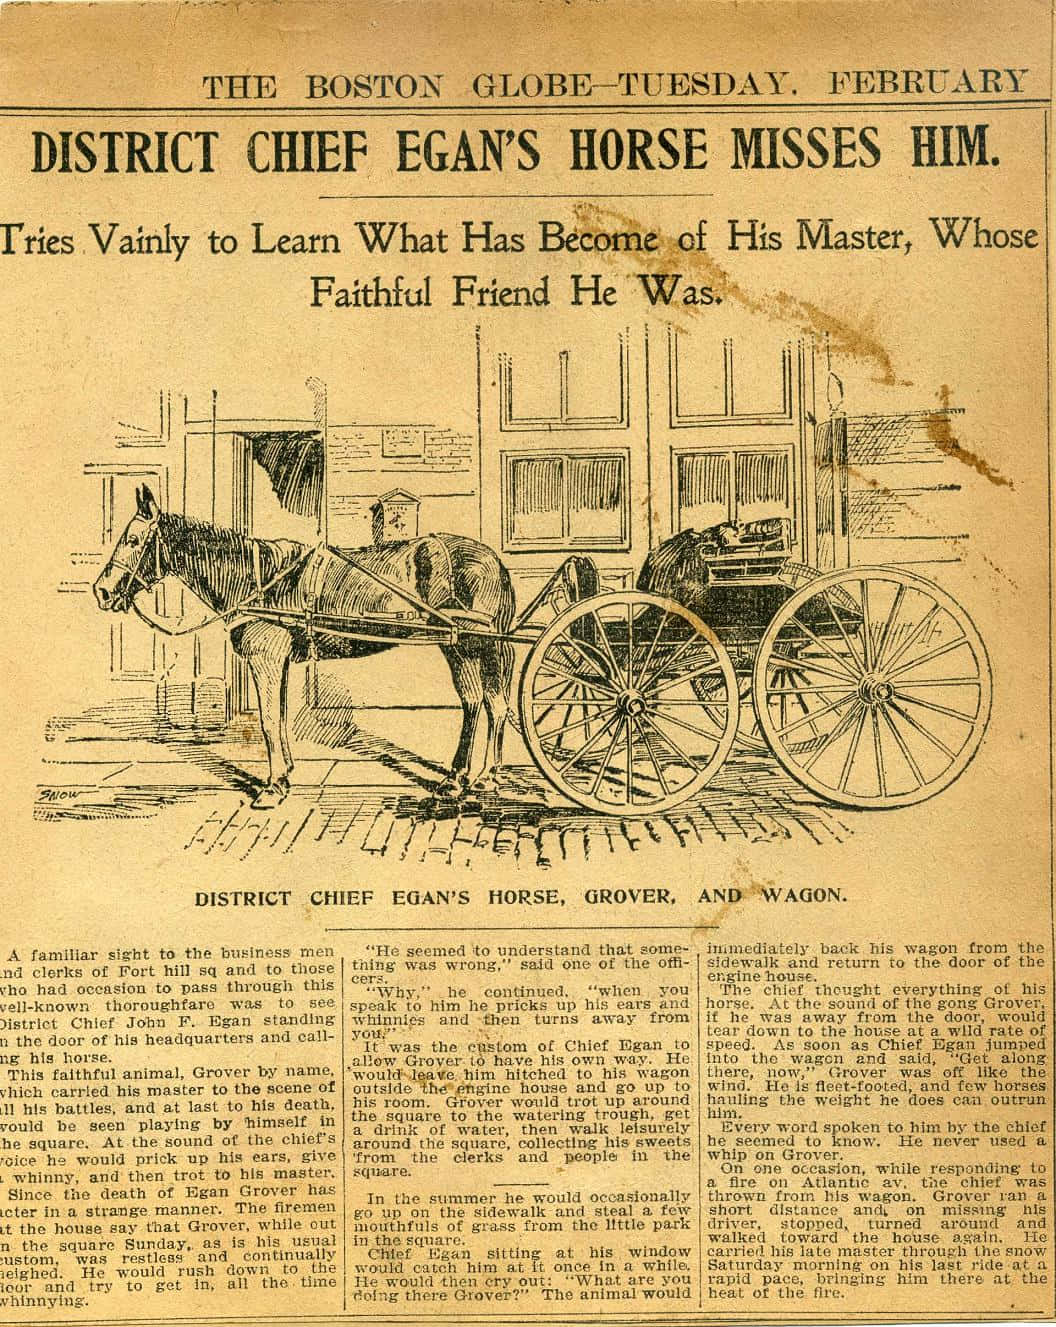 Newspaper Page With A Horse And Carriage